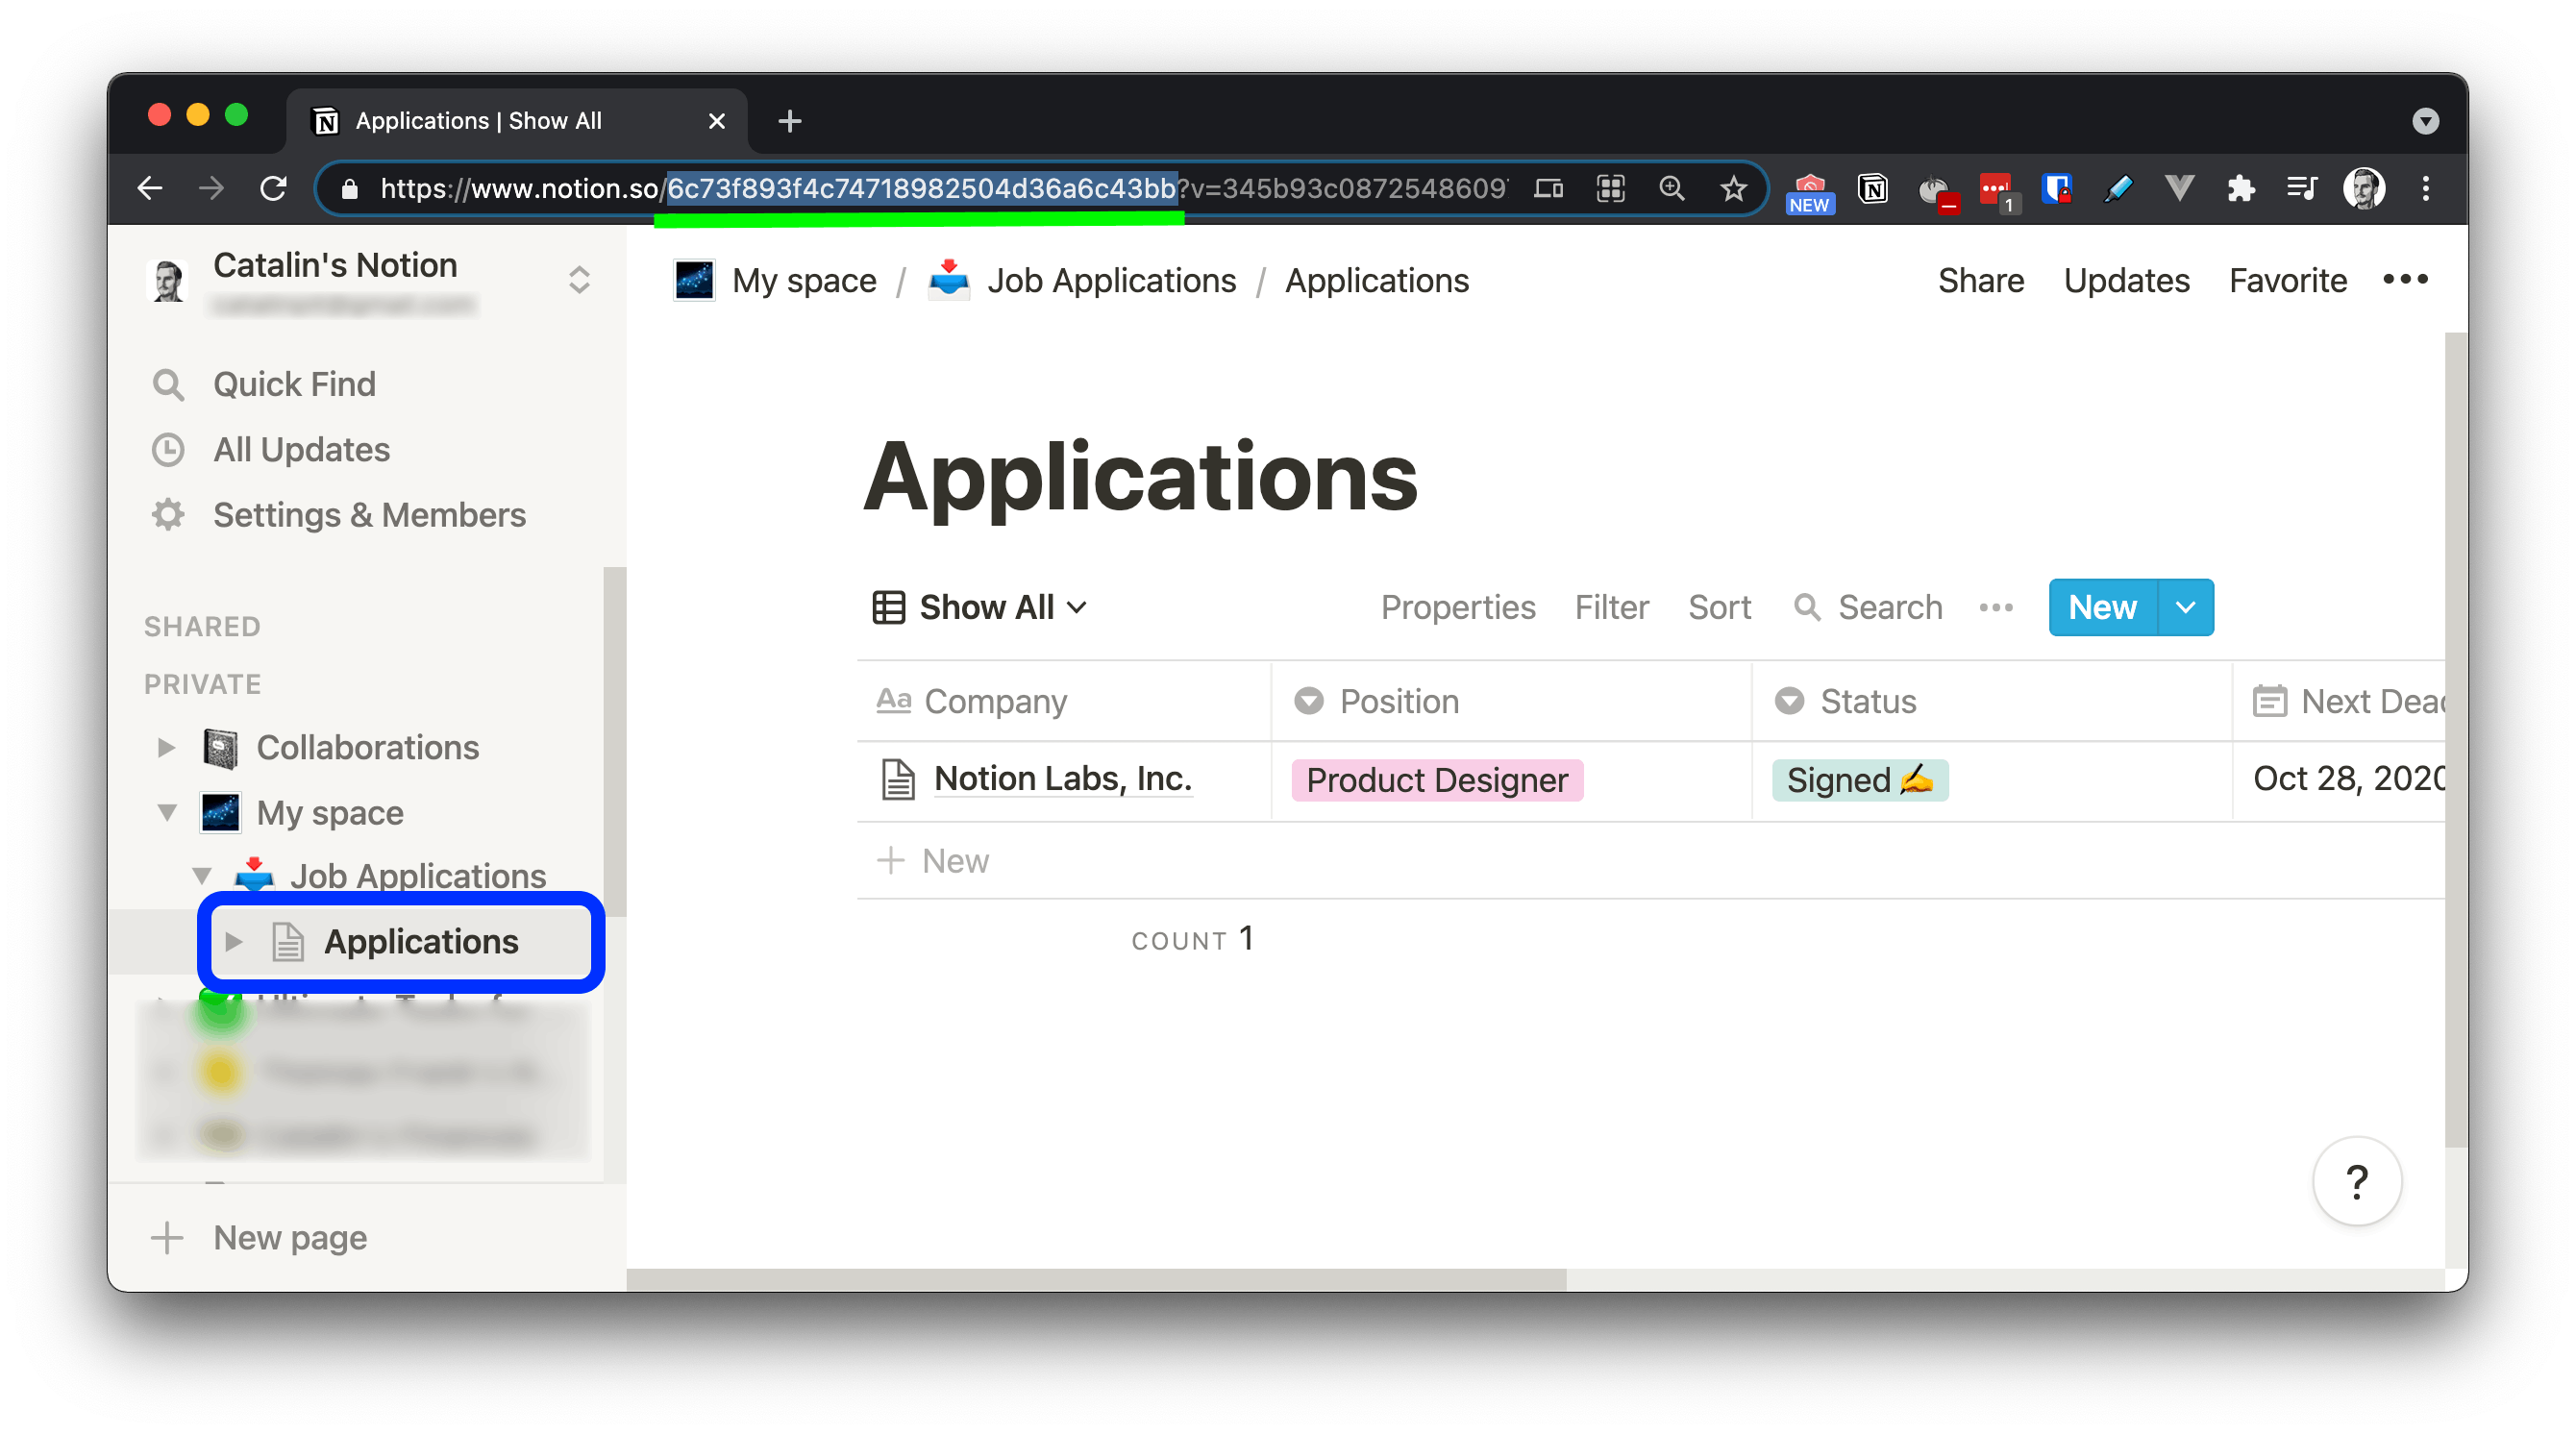 Get the database ID in Notion